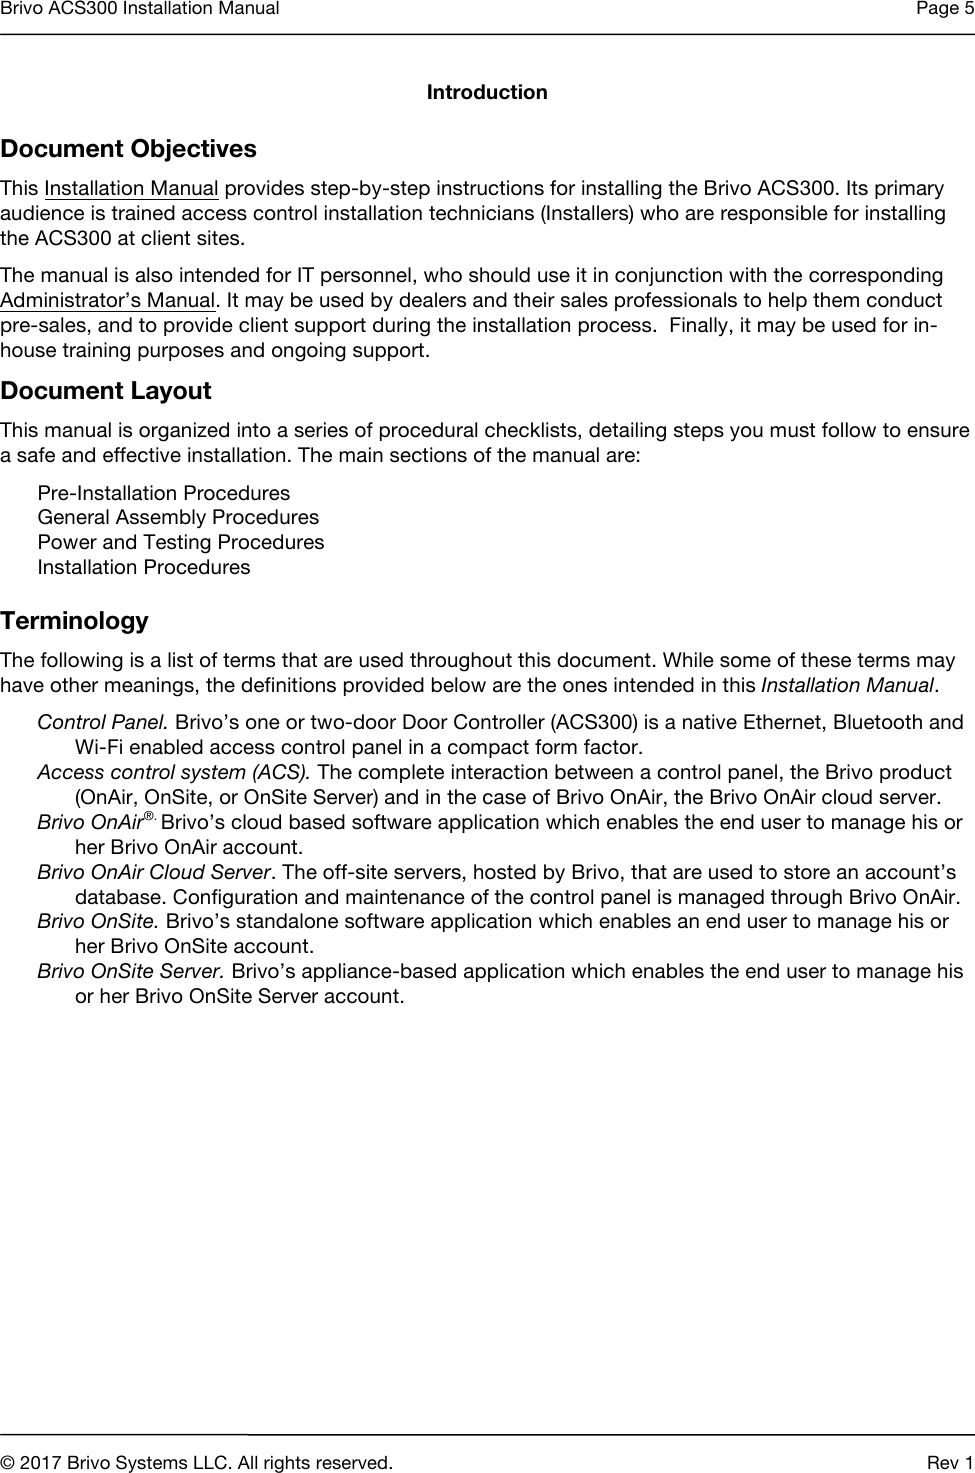 Brivo ACS300 Installation Manual Page 5     © 2017 Brivo Systems LLC. All rights reserved. Rev 1  Introduction Document Objectives This Installation Manual provides step-by-step instructions for installing the Brivo ACS300. Its primary audience is trained access control installation technicians (Installers) who are responsible for installing the ACS300 at client sites. The manual is also intended for IT personnel, who should use it in conjunction with the corresponding Administrator’s Manual. It may be used by dealers and their sales professionals to help them conduct pre-sales, and to provide client support during the installation process.  Finally, it may be used for in-house training purposes and ongoing support. Document Layout This manual is organized into a series of procedural checklists, detailing steps you must follow to ensure a safe and effective installation. The main sections of the manual are: Pre-Installation Procedures General Assembly Procedures Power and Testing Procedures  Installation Procedures   Terminology The following is a list of terms that are used throughout this document. While some of these terms may have other meanings, the definitions provided below are the ones intended in this Installation Manual. Control Panel. Brivo’s one or two-door Door Controller (ACS300) is a native Ethernet, Bluetooth and Wi-Fi enabled access control panel in a compact form factor. Access control system (ACS). The complete interaction between a control panel, the Brivo product (OnAir, OnSite, or OnSite Server) and in the case of Brivo OnAir, the Brivo OnAir cloud server.  Brivo OnAir®. Brivo’s cloud based software application which enables the end user to manage his or her Brivo OnAir account. Brivo OnAir Cloud Server. The off-site servers, hosted by Brivo, that are used to store an account’s database. Configuration and maintenance of the control panel is managed through Brivo OnAir. Brivo OnSite. Brivo’s standalone software application which enables an end user to manage his or her Brivo OnSite account.  Brivo OnSite Server. Brivo’s appliance-based application which enables the end user to manage his or her Brivo OnSite Server account.    